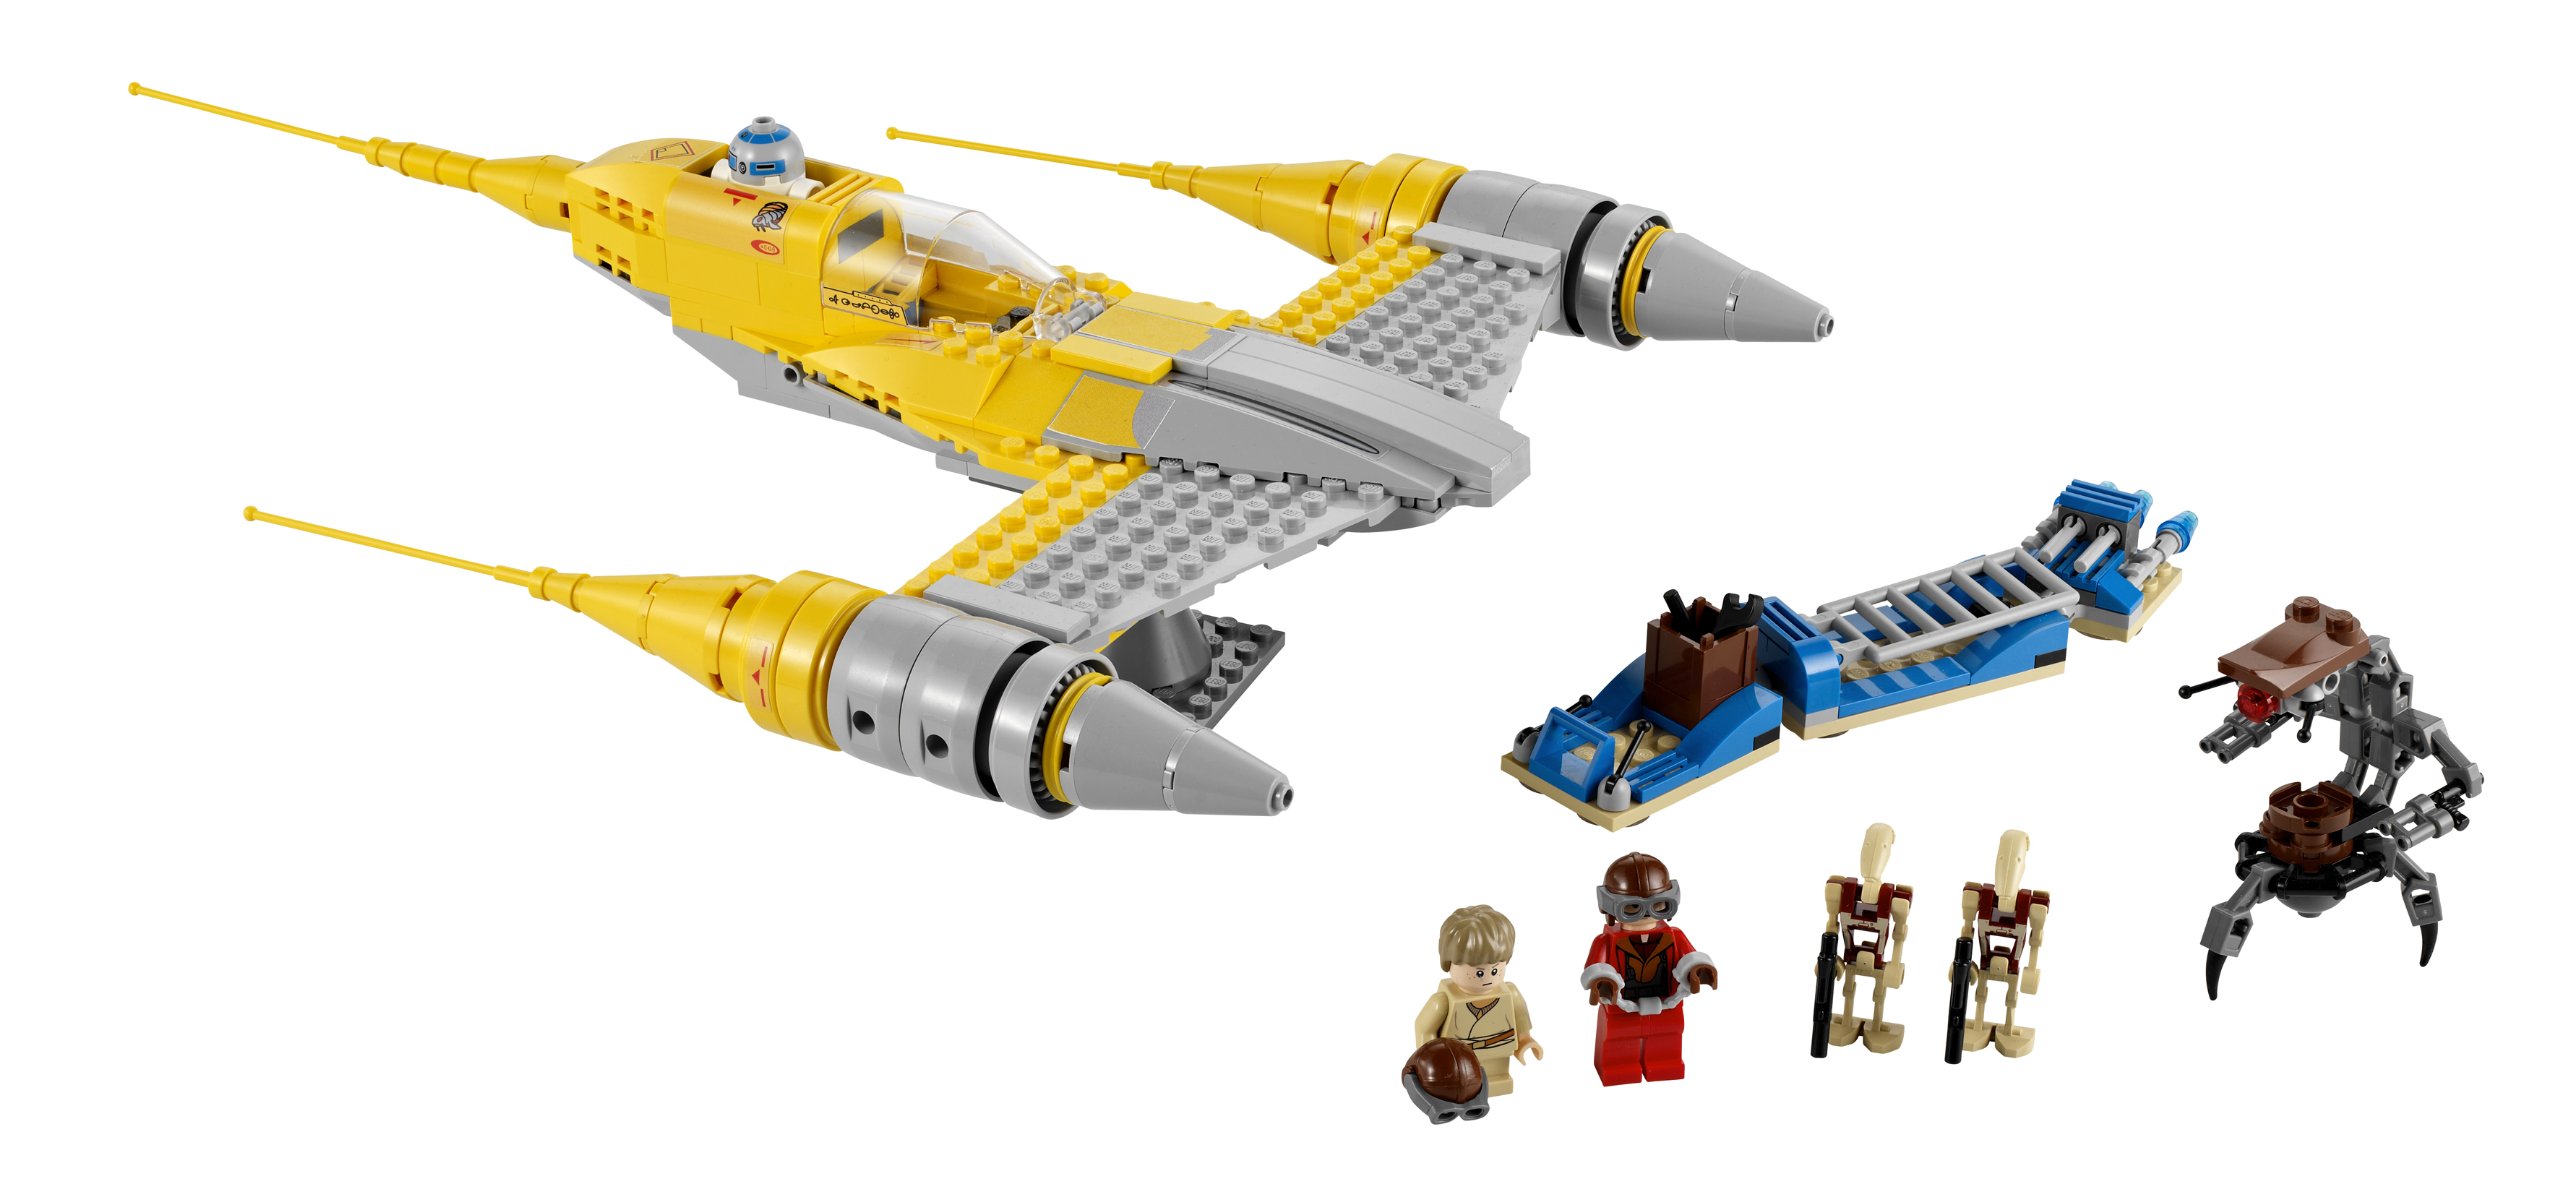 LEGO Star Wars Exclusive Special Edition Set #7877 Naboo Starfighter